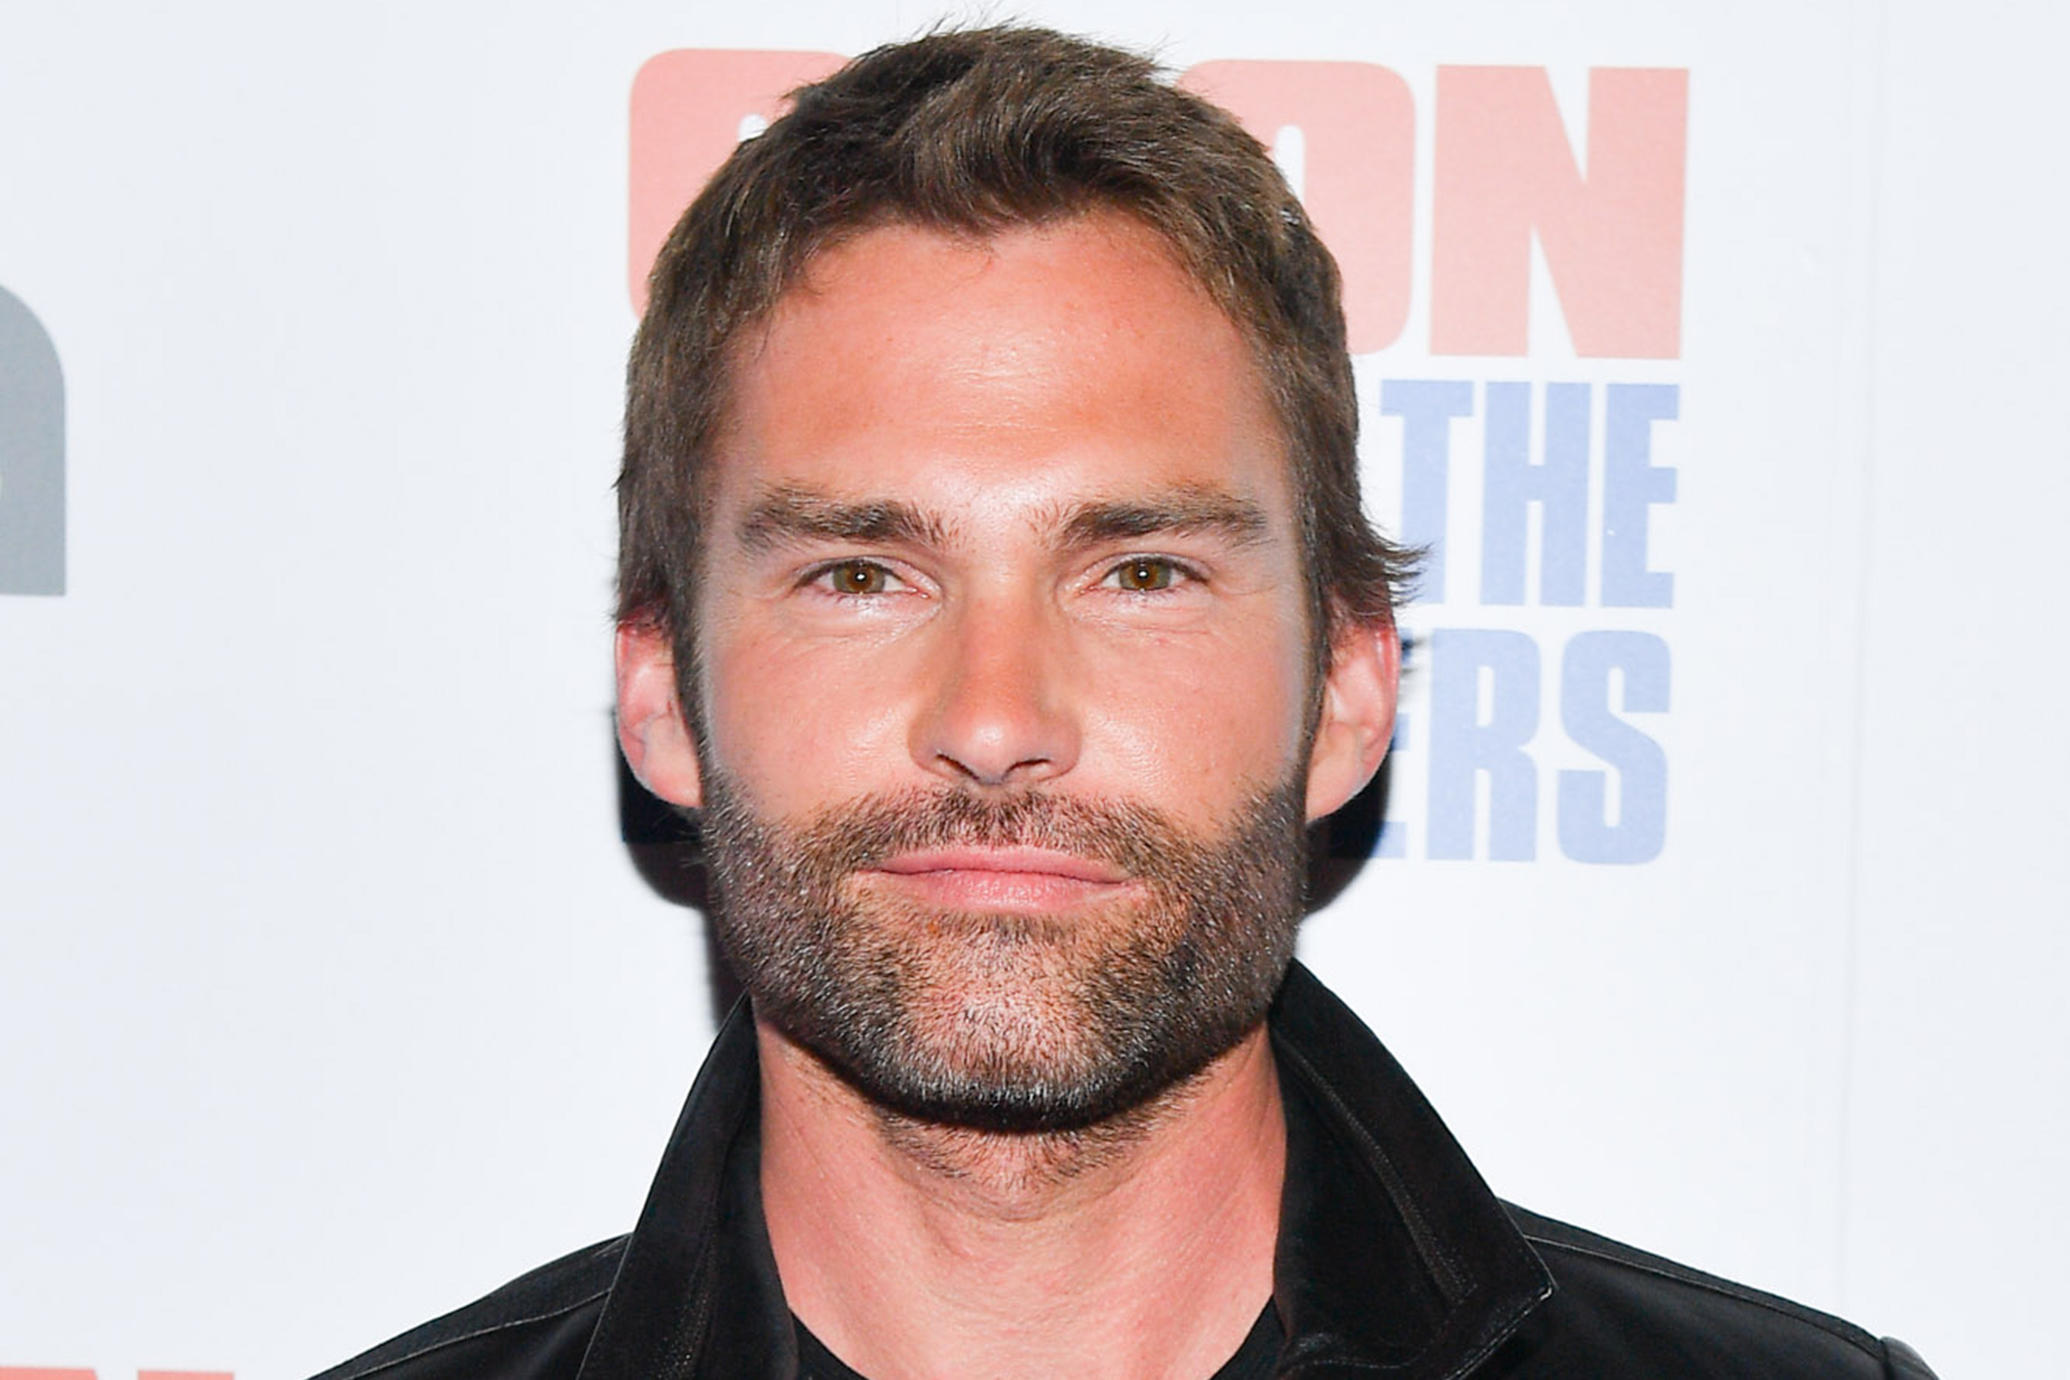 TORONTO, ON - MARCH 06:  Actor Seann William Scott attends "Goon: Last Of The Enforcers" Premiere at Scotiabank Theatre on March 6, 2017 in Toronto, Canada.  (Photo by George Pimentel/Getty Images)